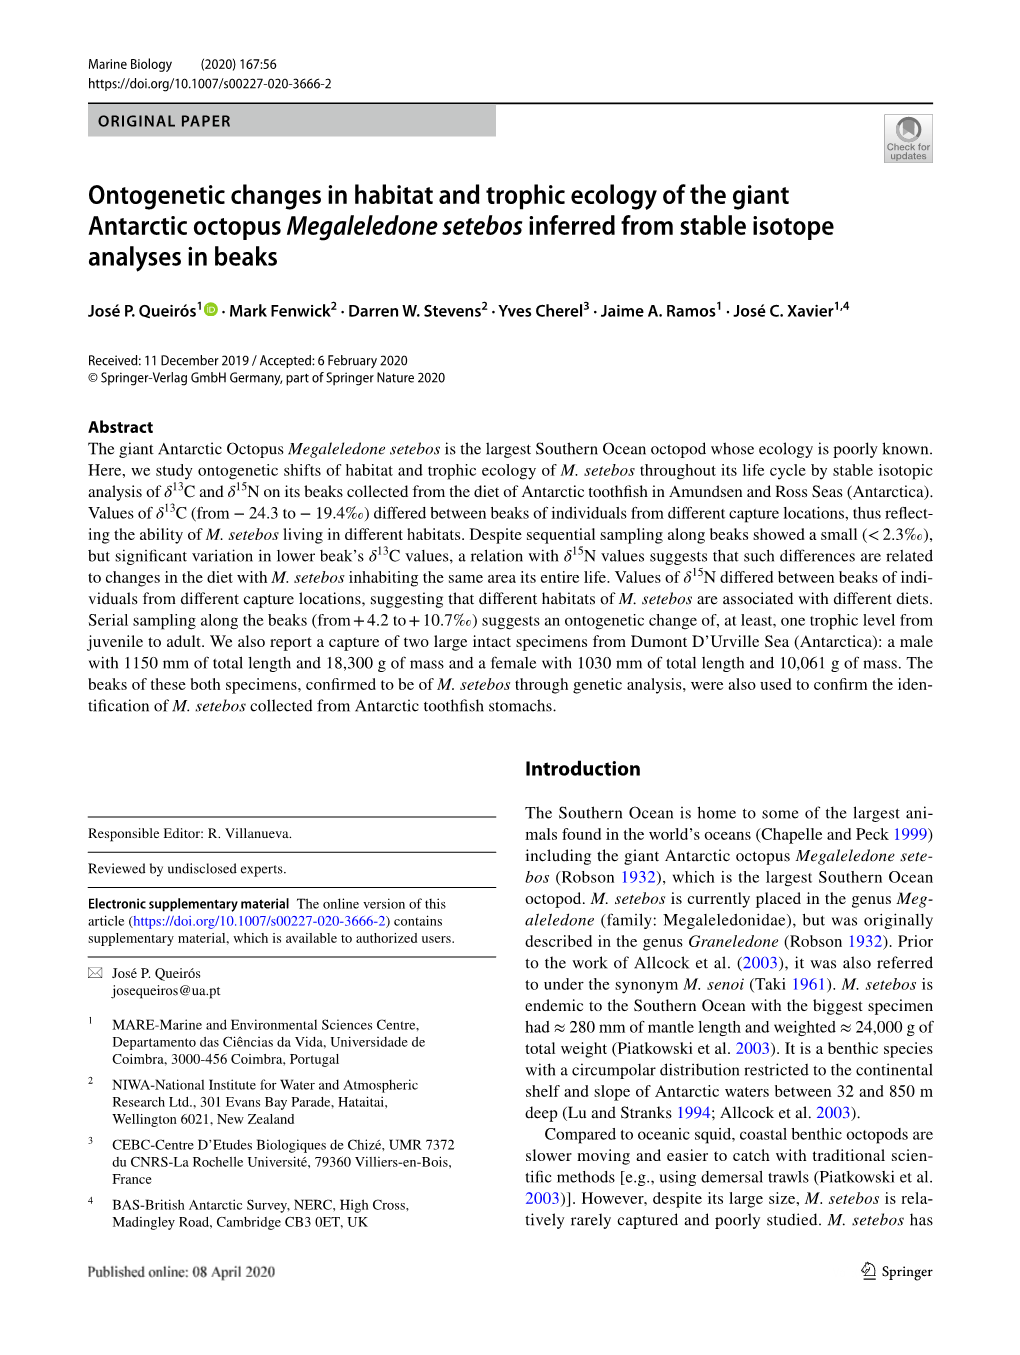 Ontogenetic Changes in Habitat and Trophic Ecology of the Giant Antarctic Octopus Megaleledone Setebos Inferred from Stable Isotope Analyses in Beaks